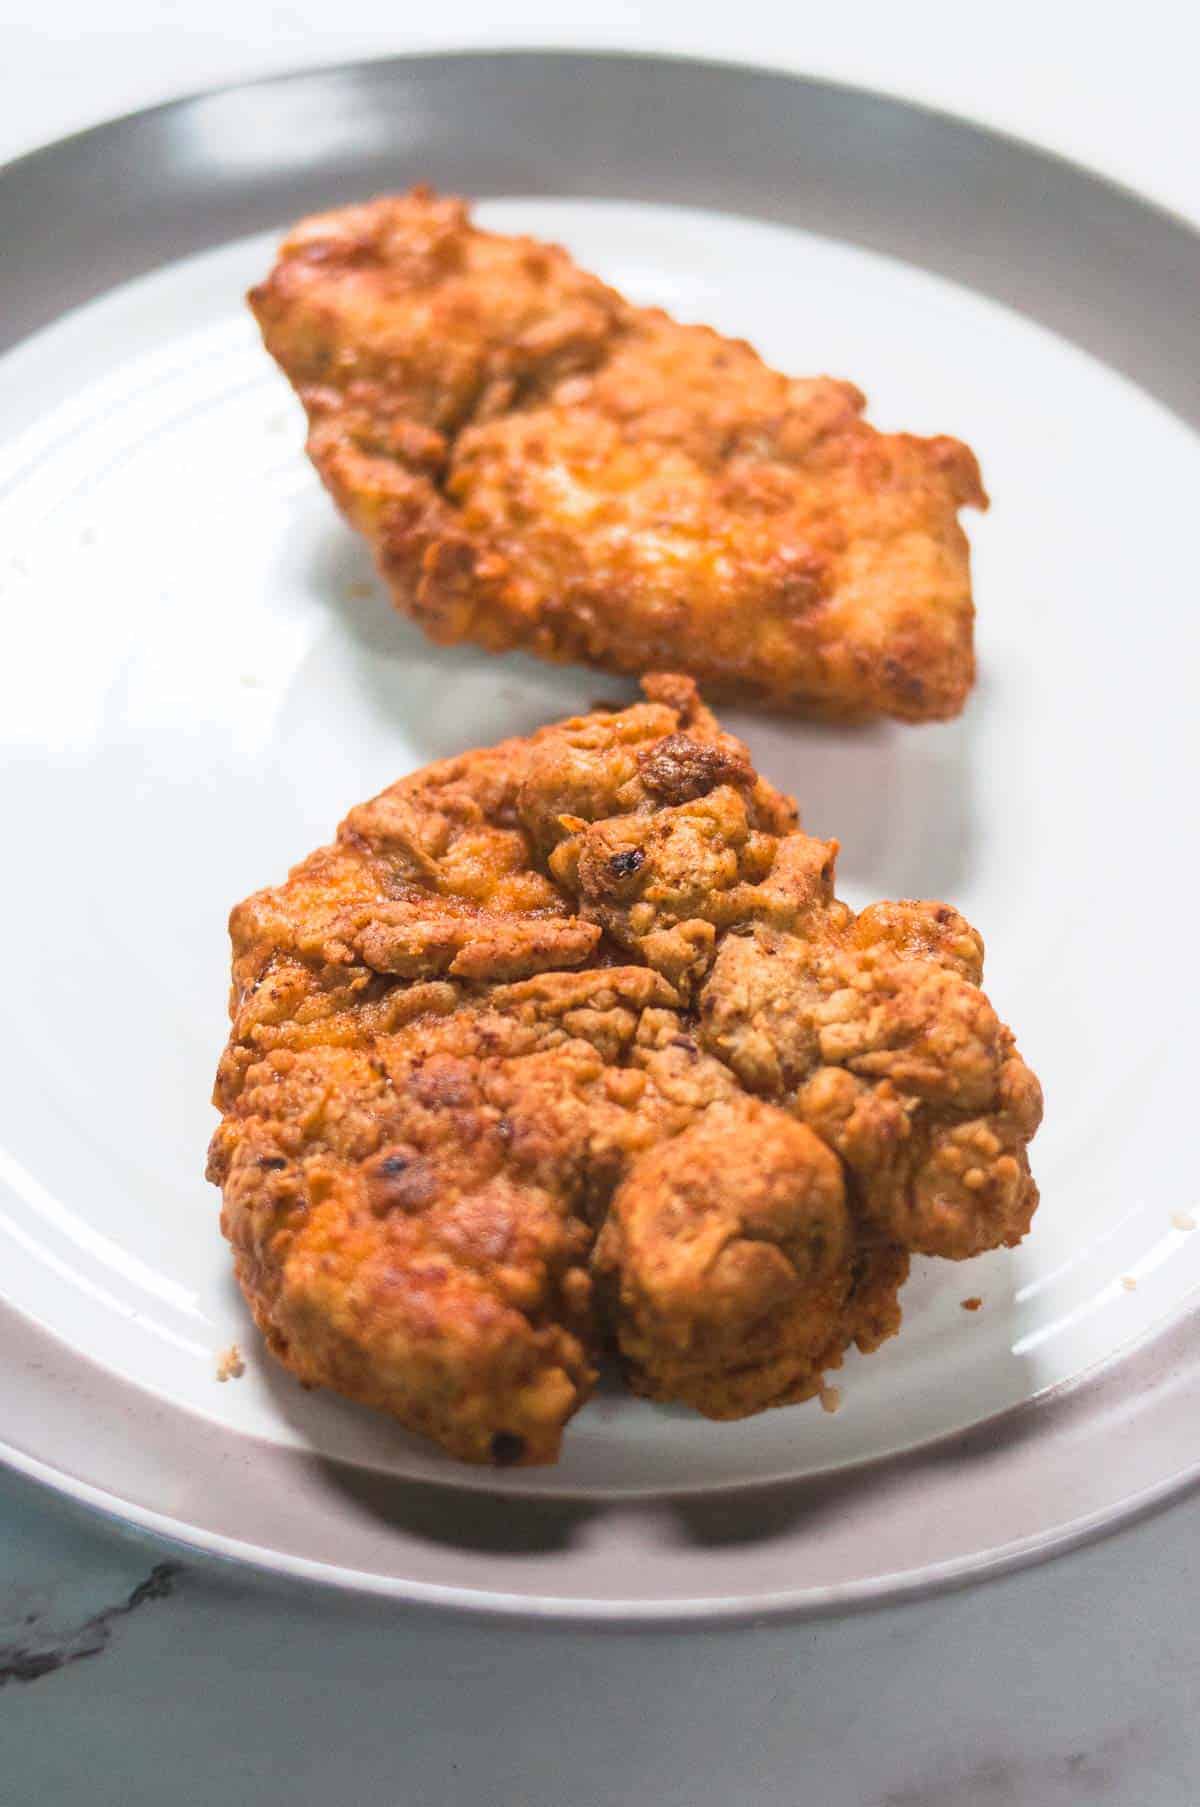 Crispy fried chicken served in a plate.